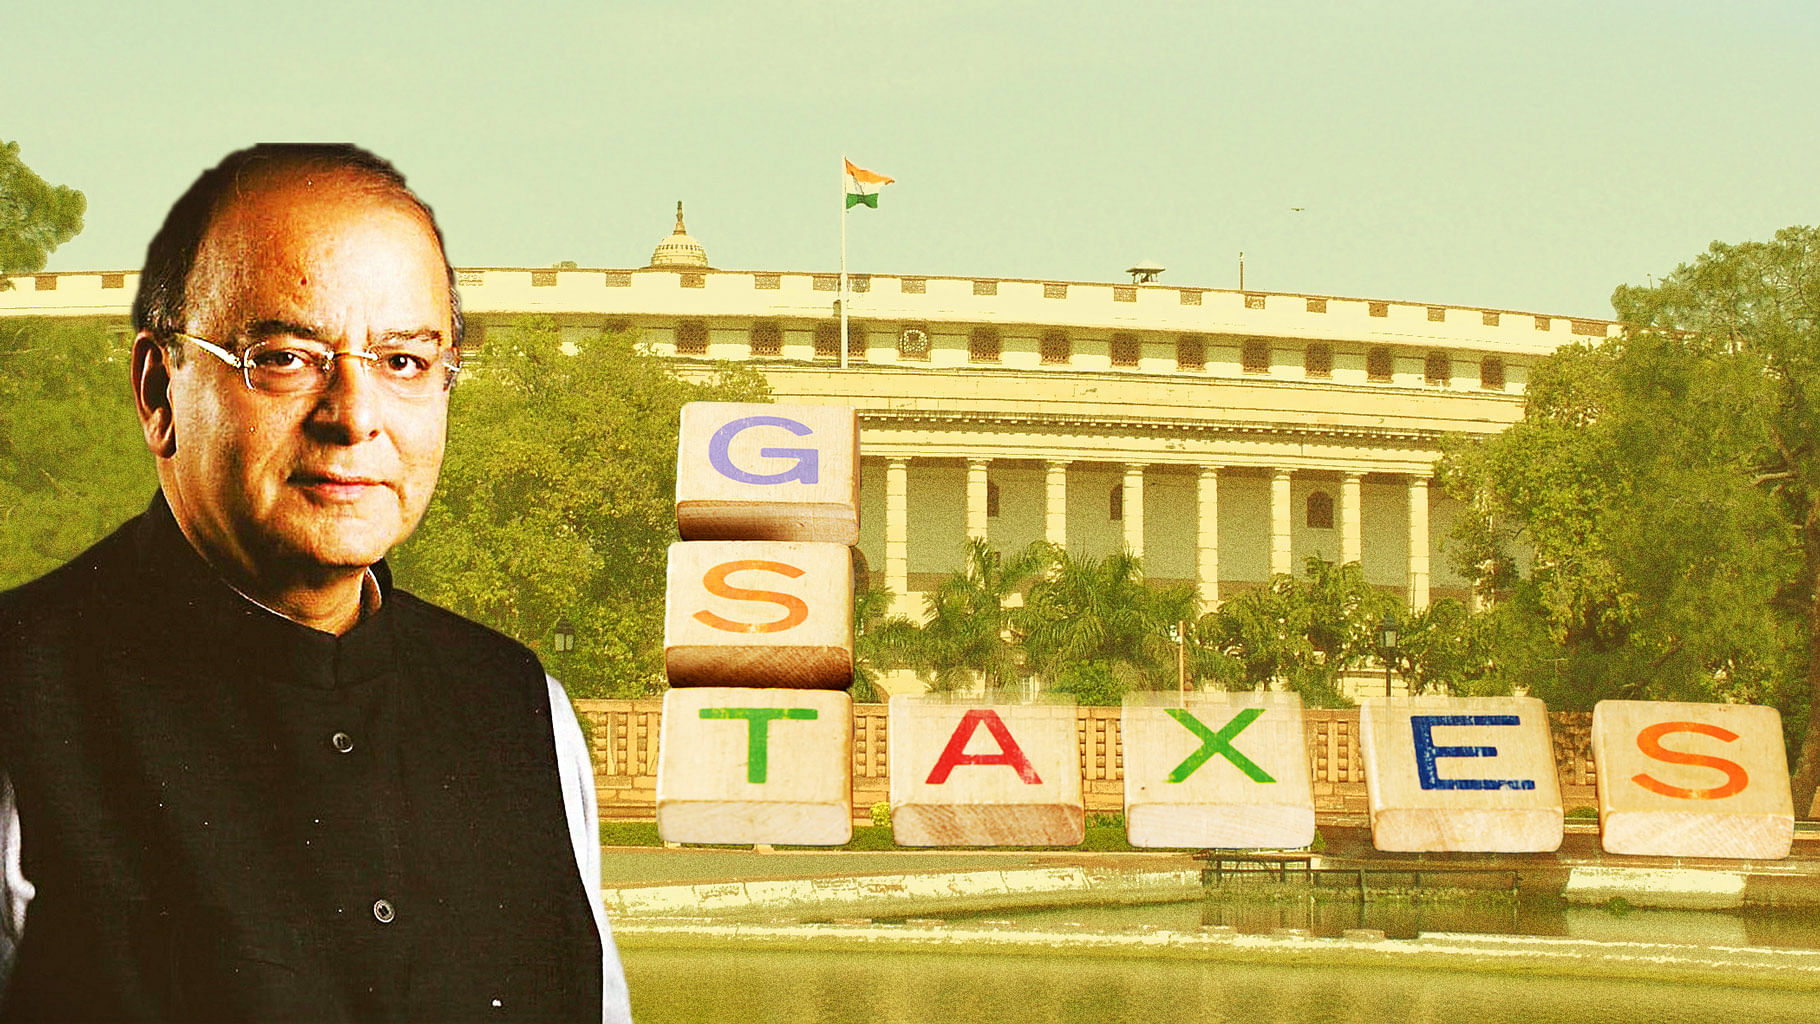 

The GST bill is being touted as the biggest tax reform in the history of independent India. (Photo: <b>The Quint</b>)